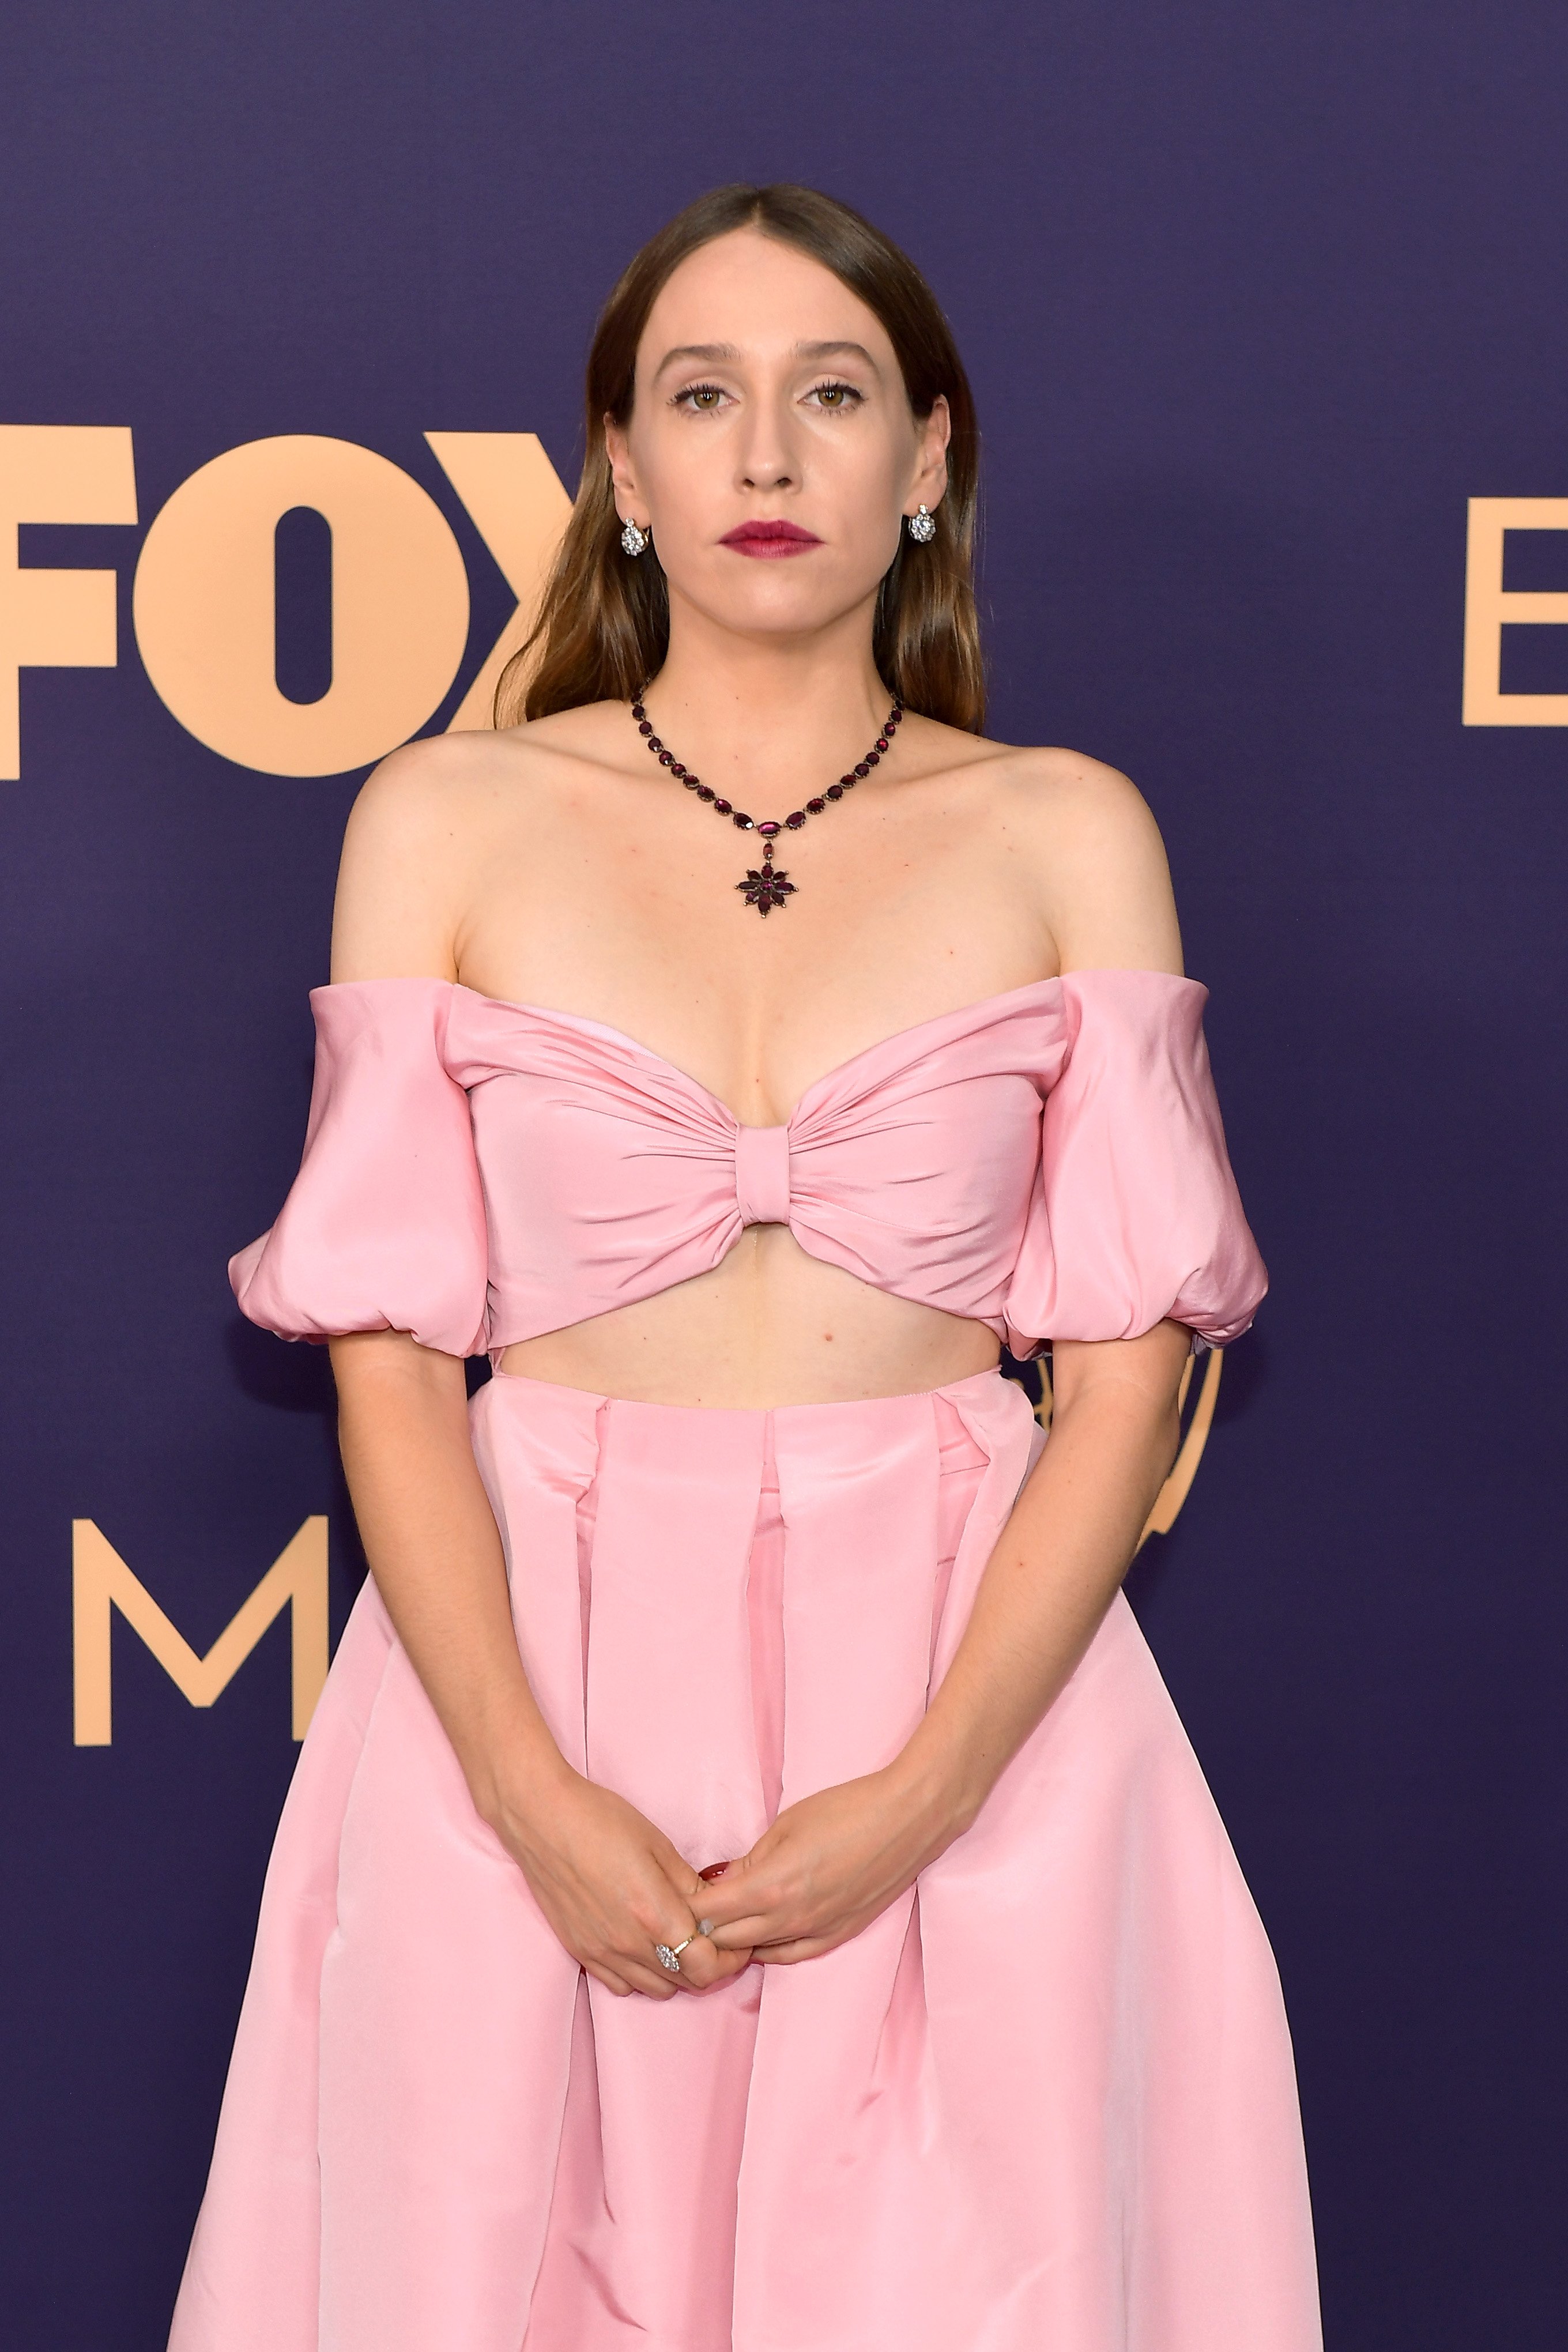 Sarah Sutherland attends the 71st Emmy Awards at Microsoft Theater in Los Angeles, California on September 22, 2019 | Source: Getty Images